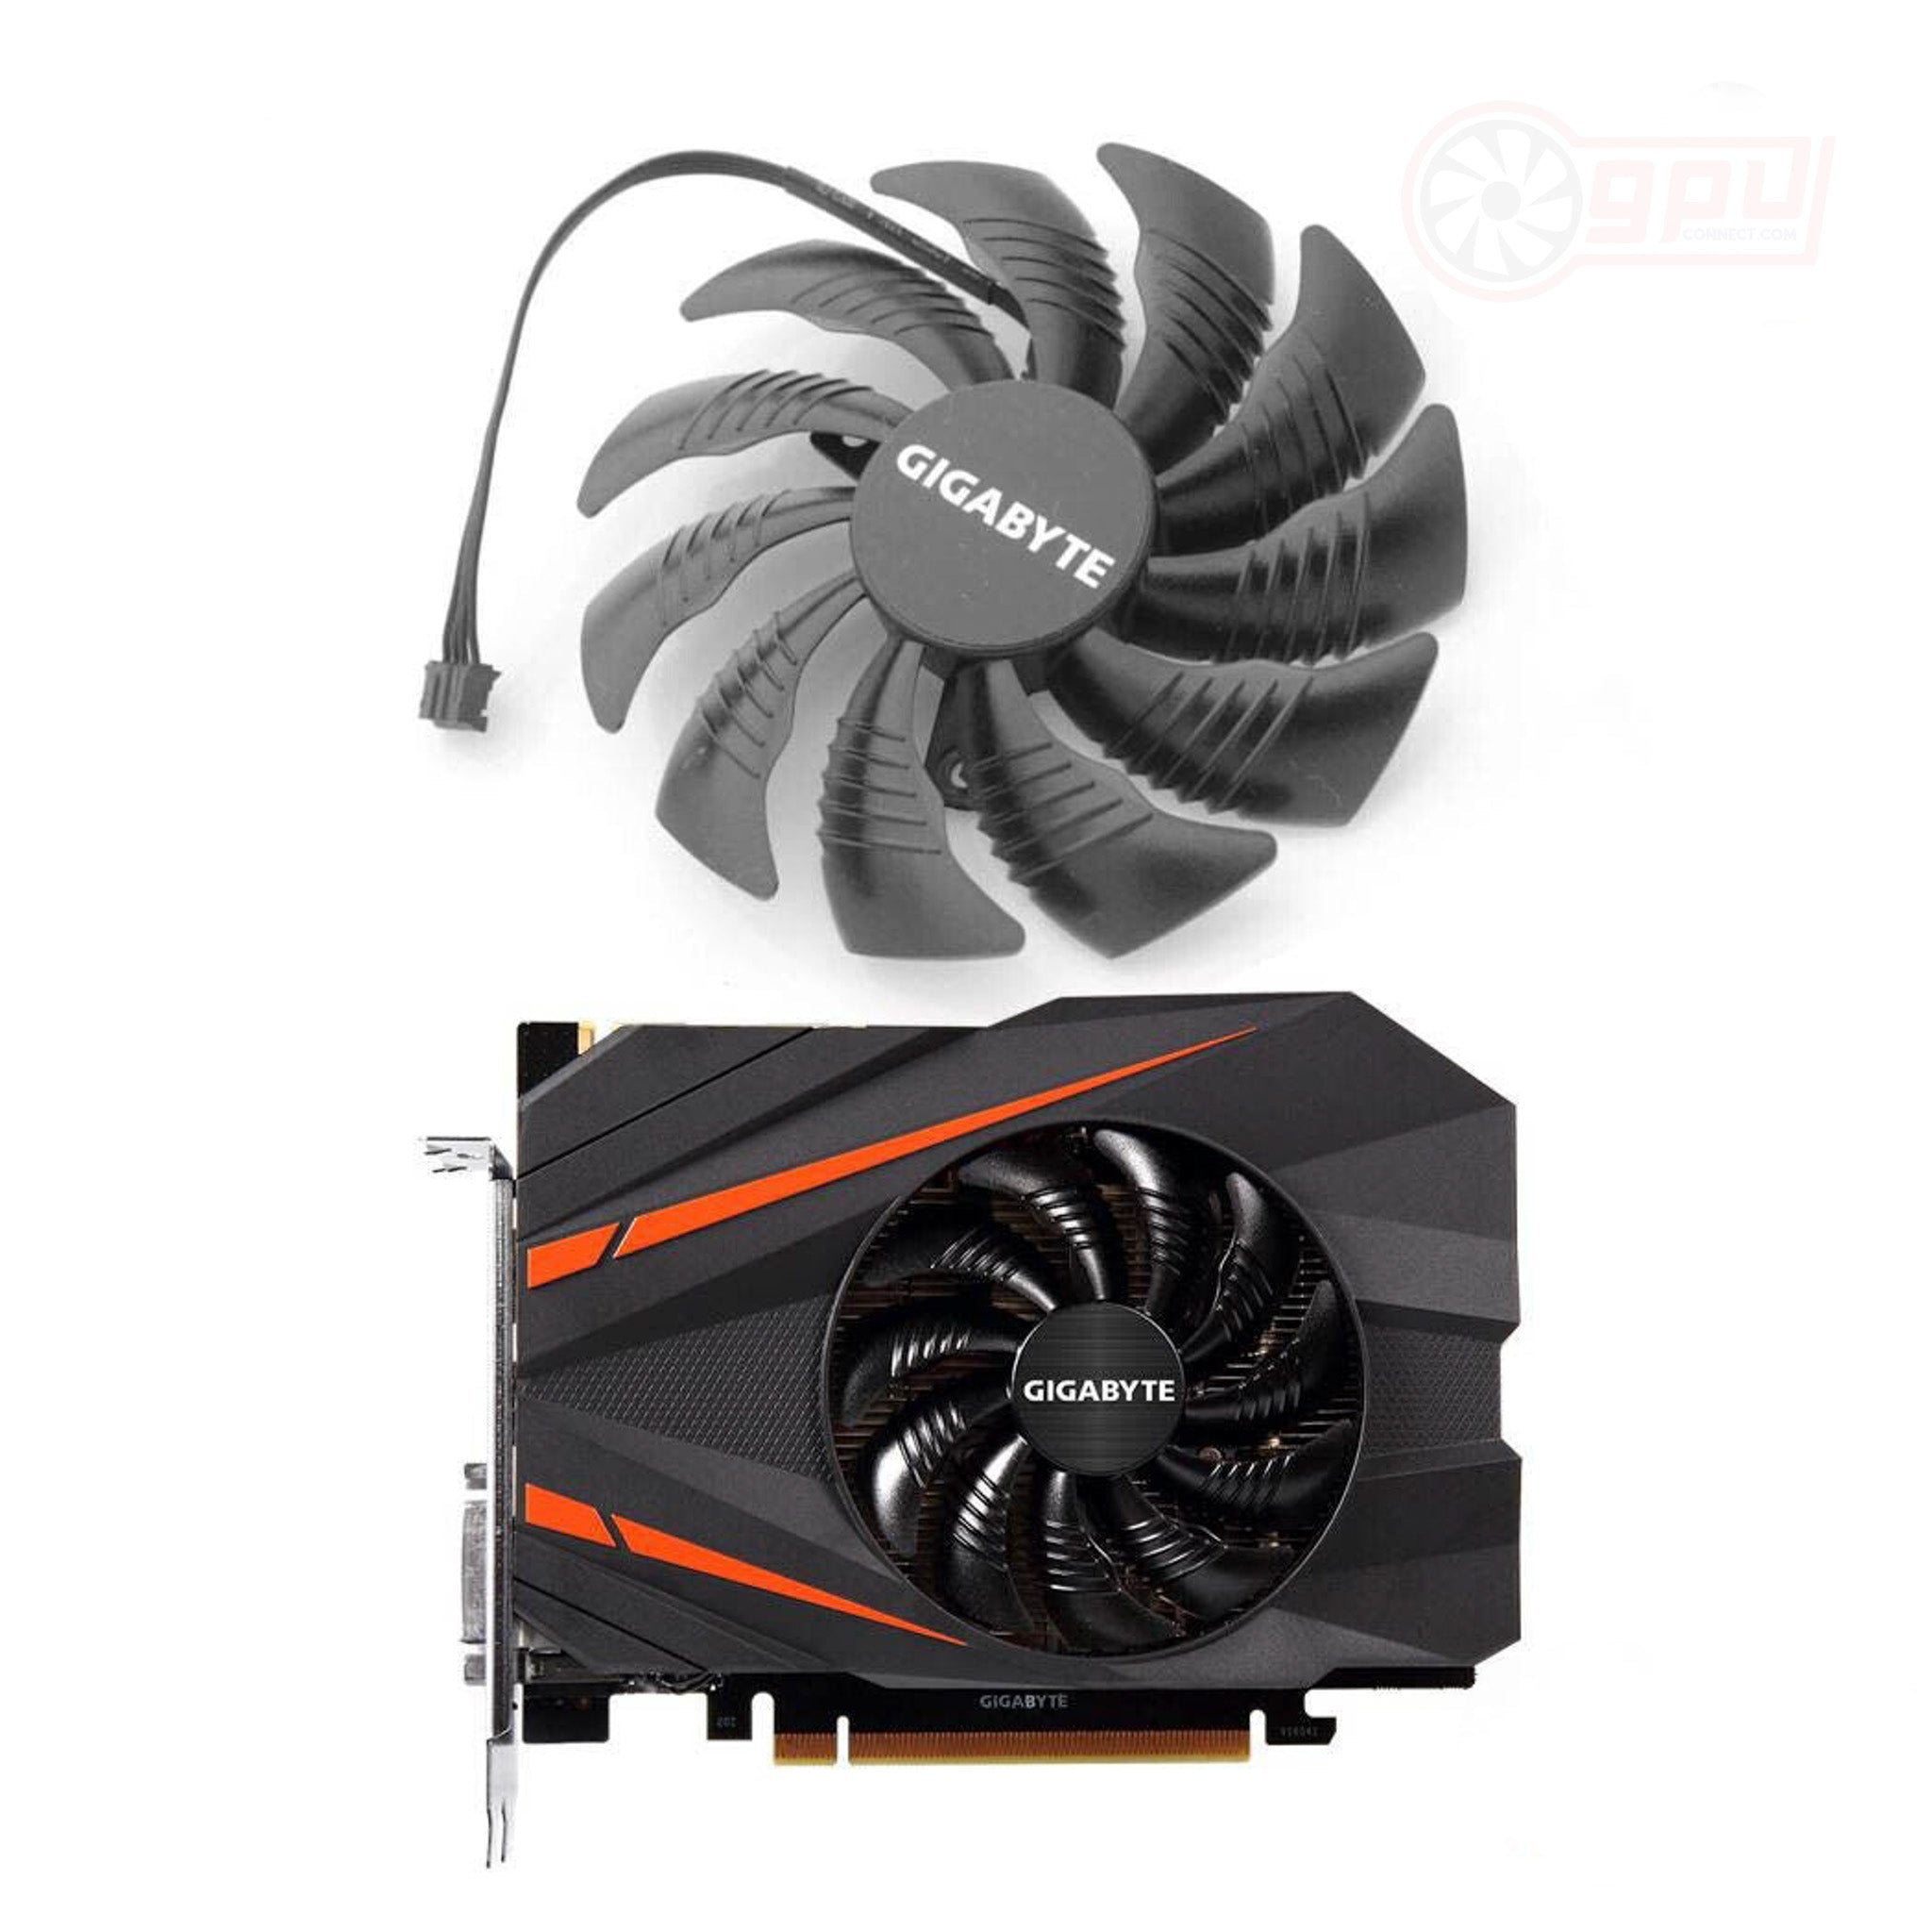 GIGABYTE GTX 1060 1080 MINI ITX Replacement Cooling Fan – GPUCONNECT.COM